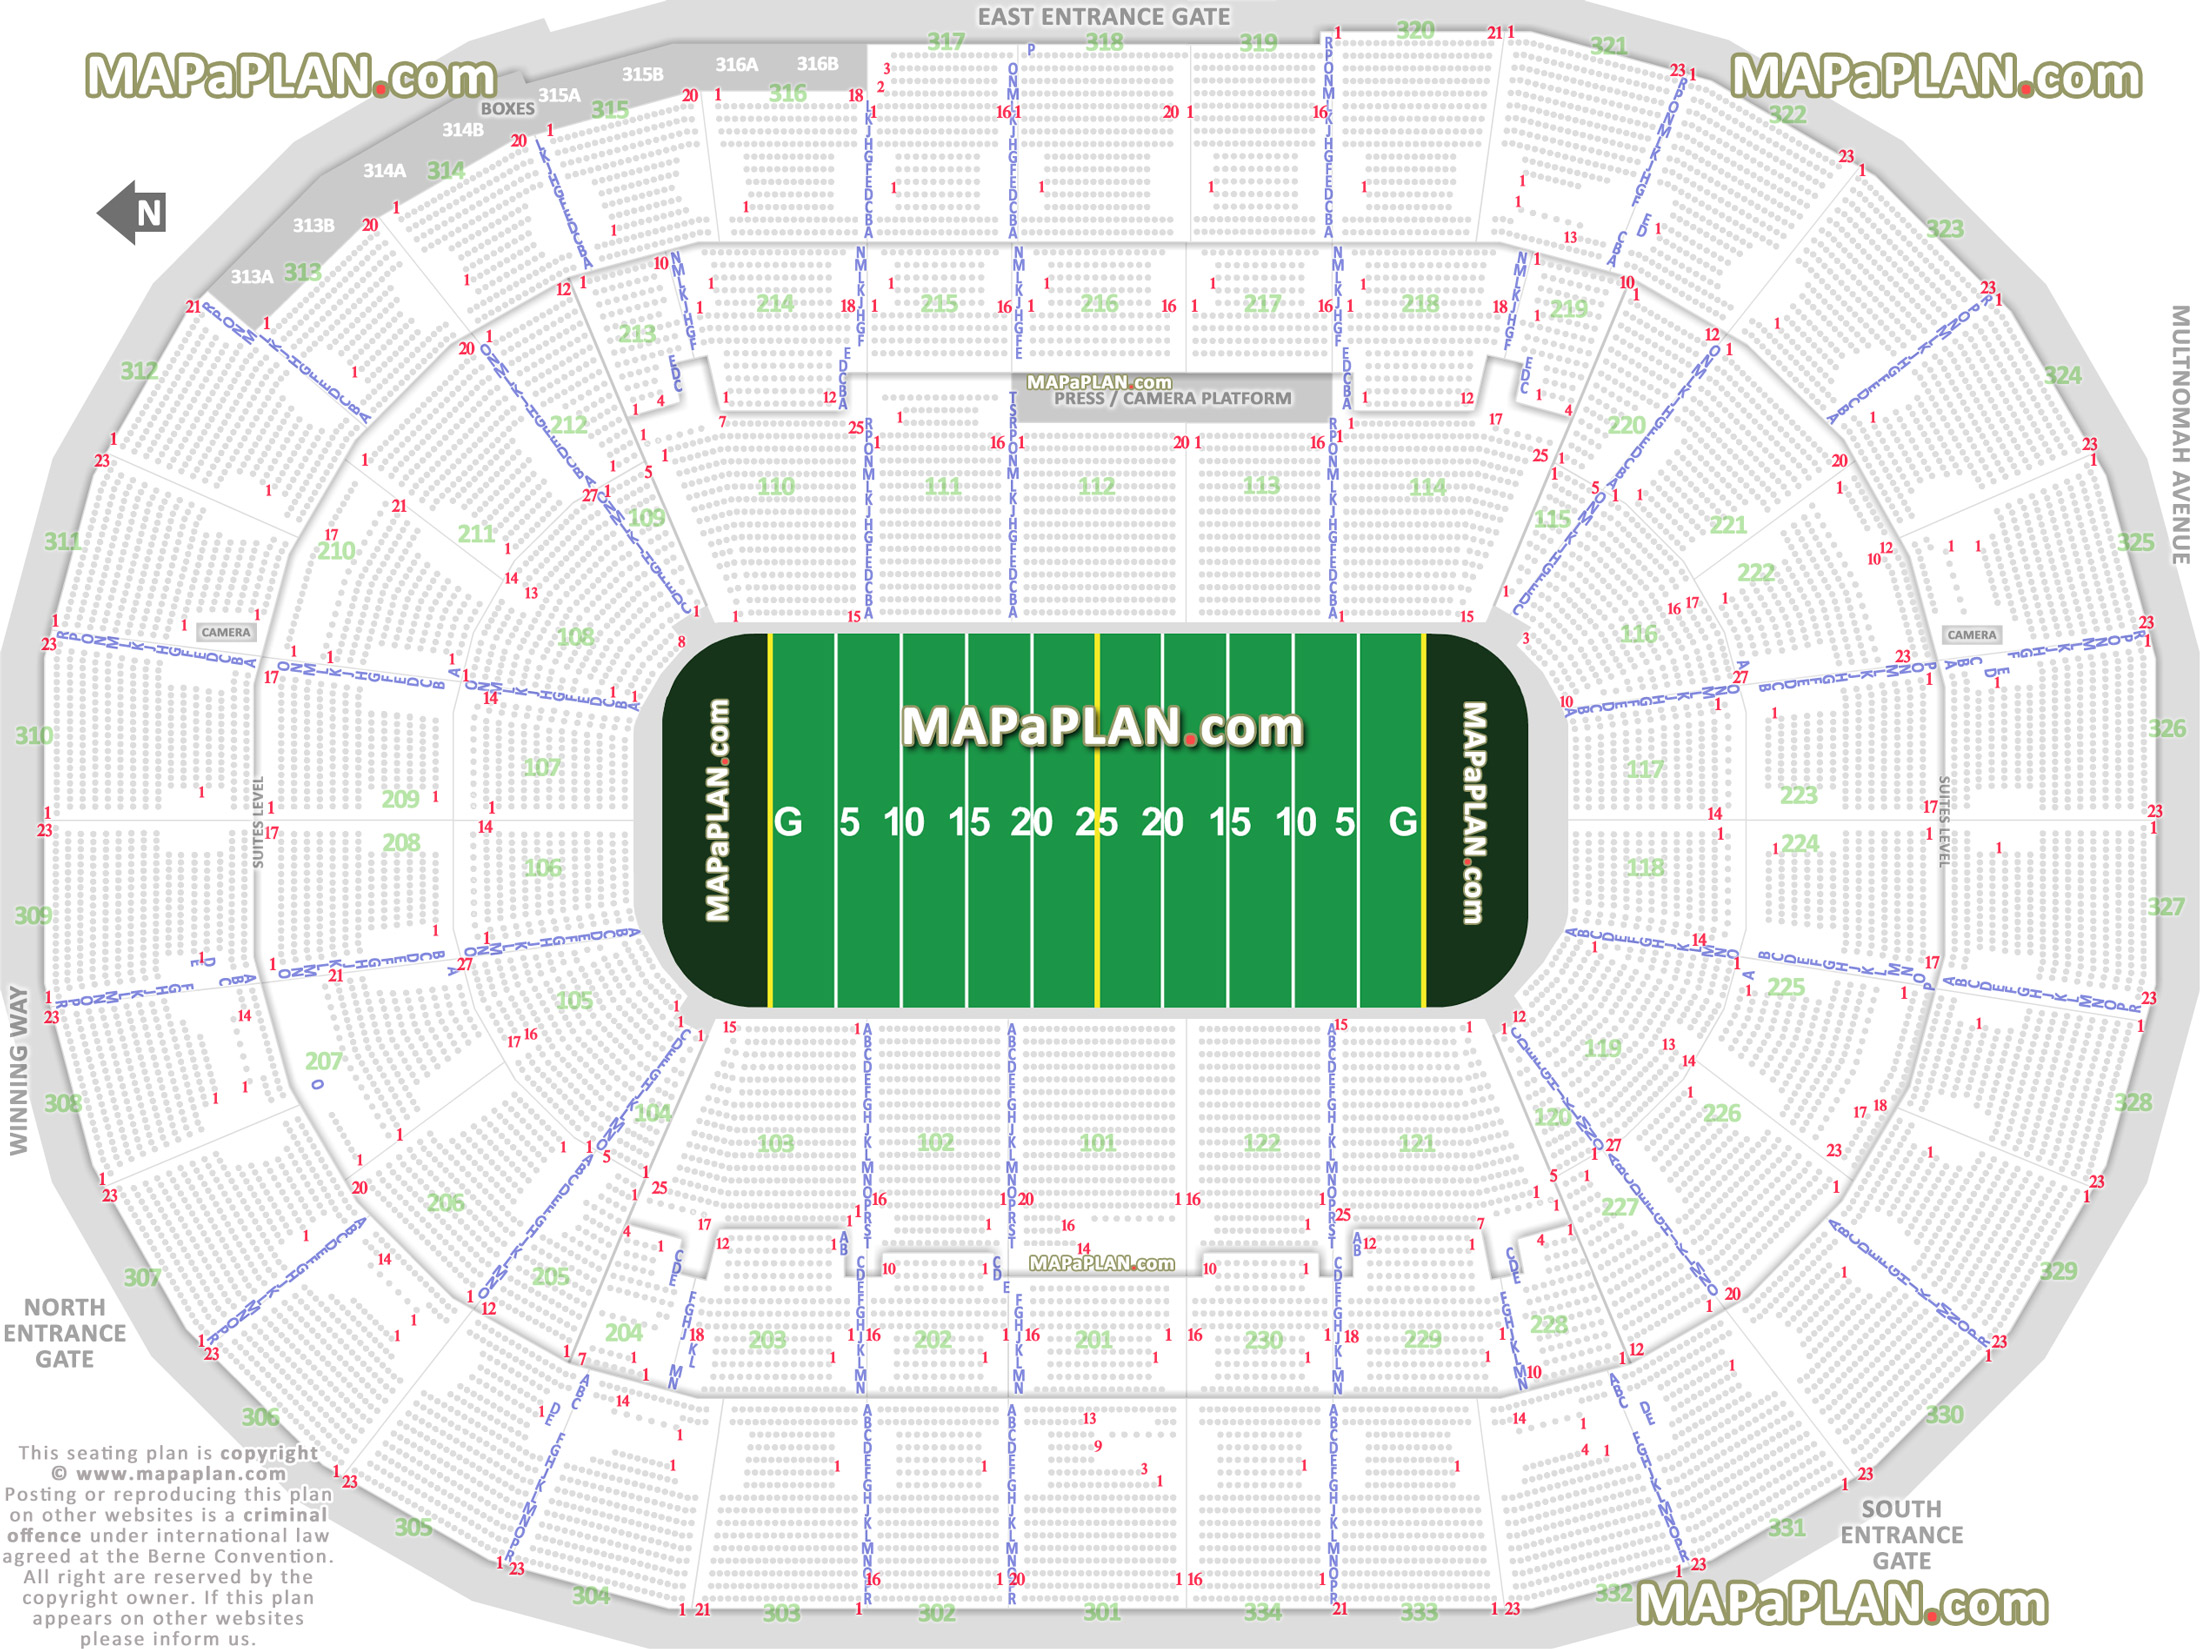 thunder afl arena football league best partial obstructed view seat finder precise detailed aisle numbering location data tool sections 101 103 106 107 110 114 116 119 121 203 Portland Moda Center seating chart